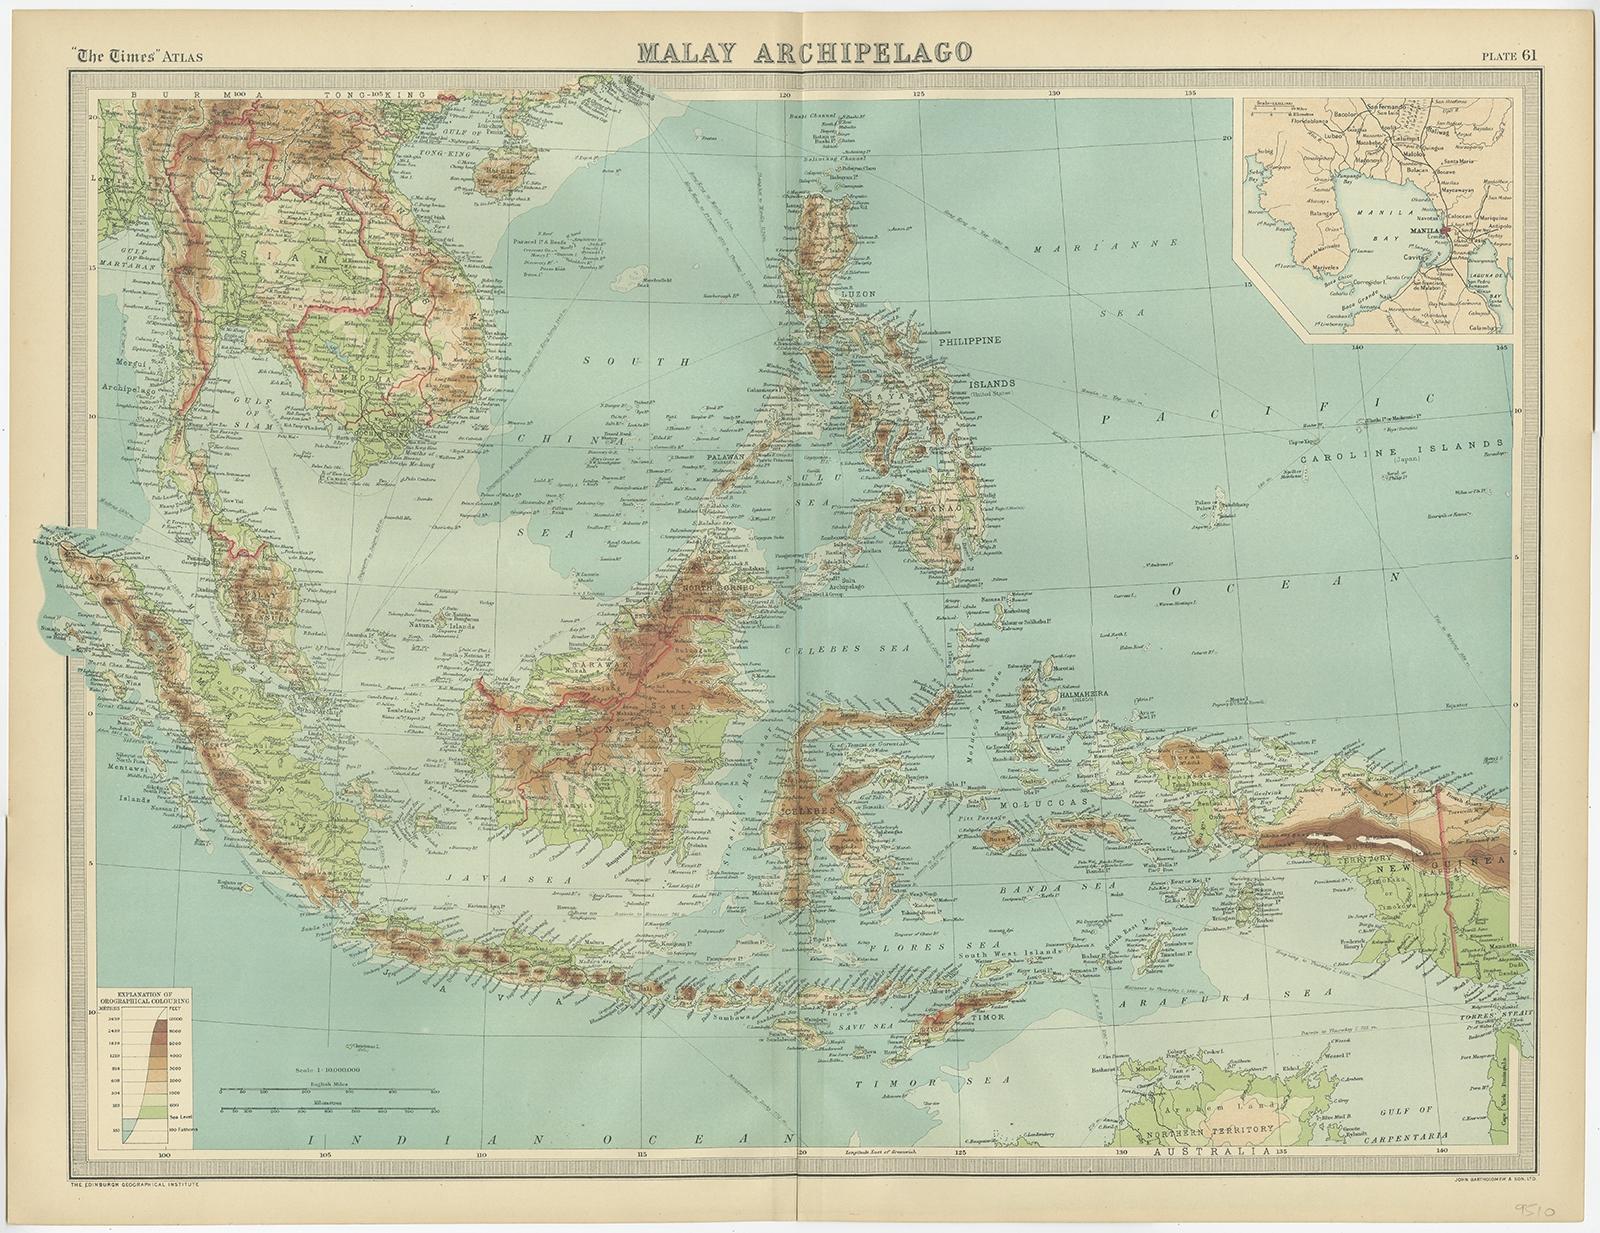 Antique map of South East Asia titled 'Malay Archipelago'. 

Old map of South East Asia depicting the Malay Archipelago including Sumatra, Java, Timor, Borneo, Celebes, Moluccas and surroundings. This map originates from 'The Times' atlas.